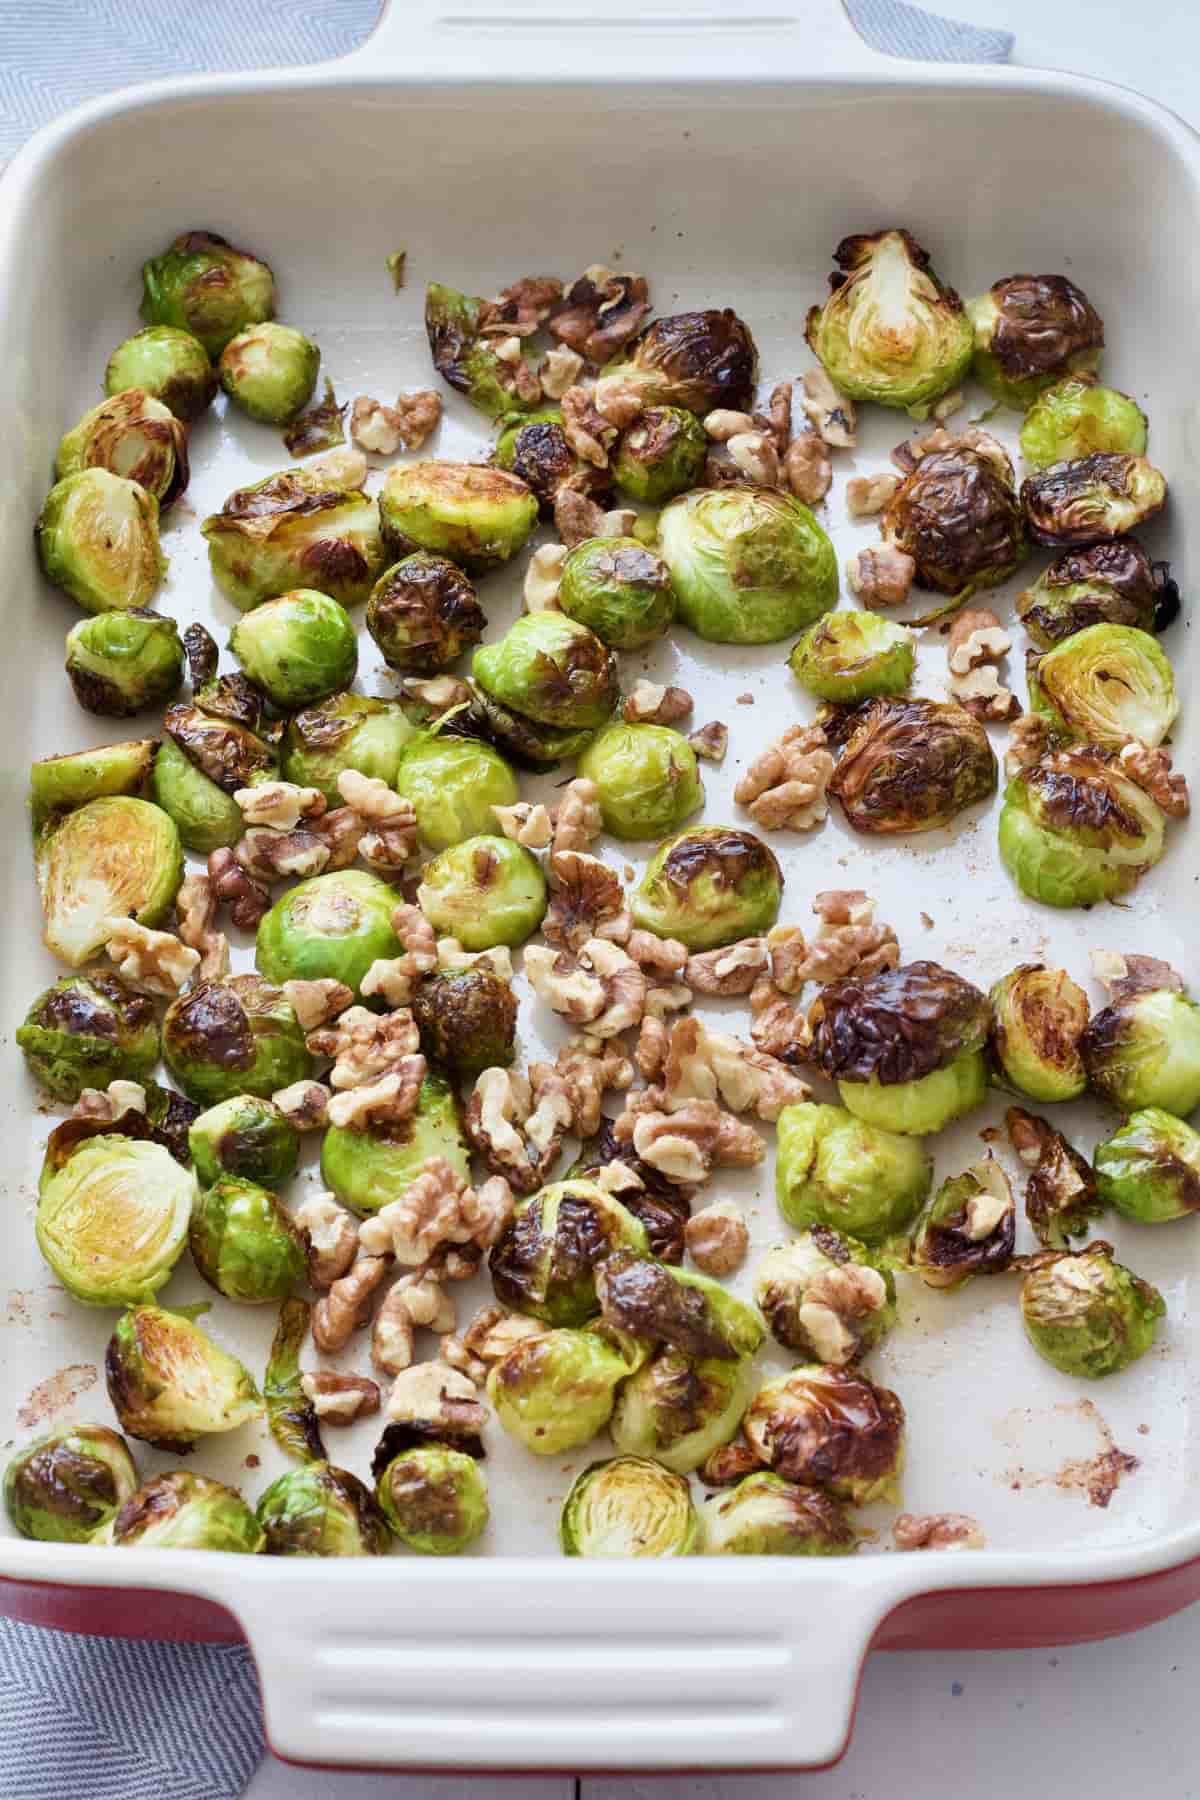 Roasted brussels sprouts in a roasting dish with added walnuts.